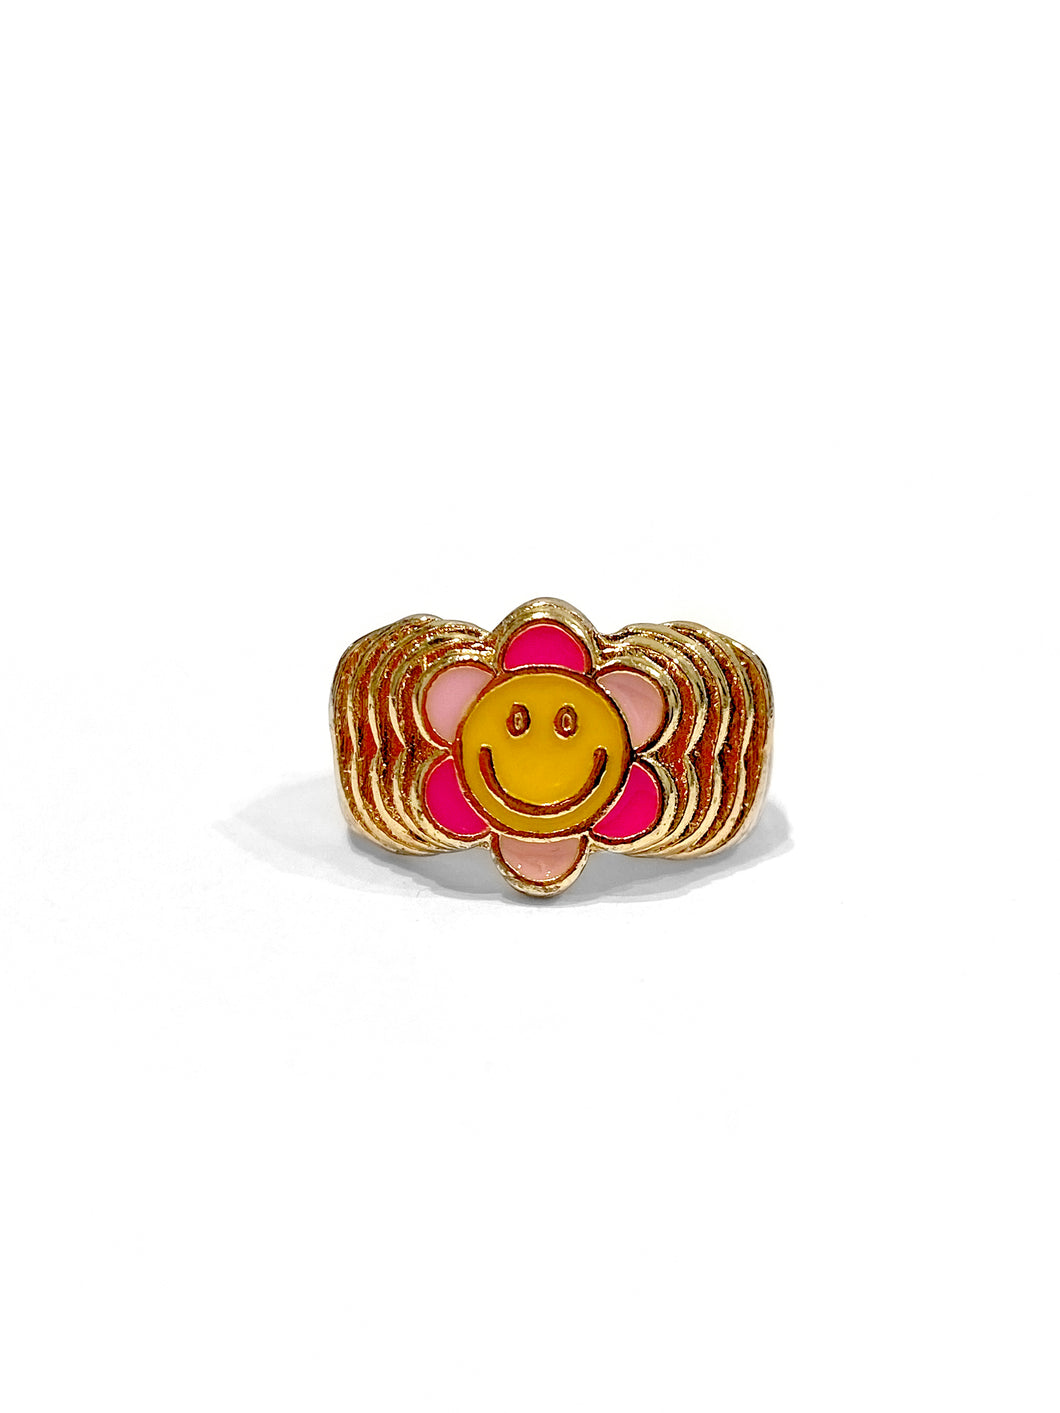 pink and yellow gold flower ring with a smiley face in the middle